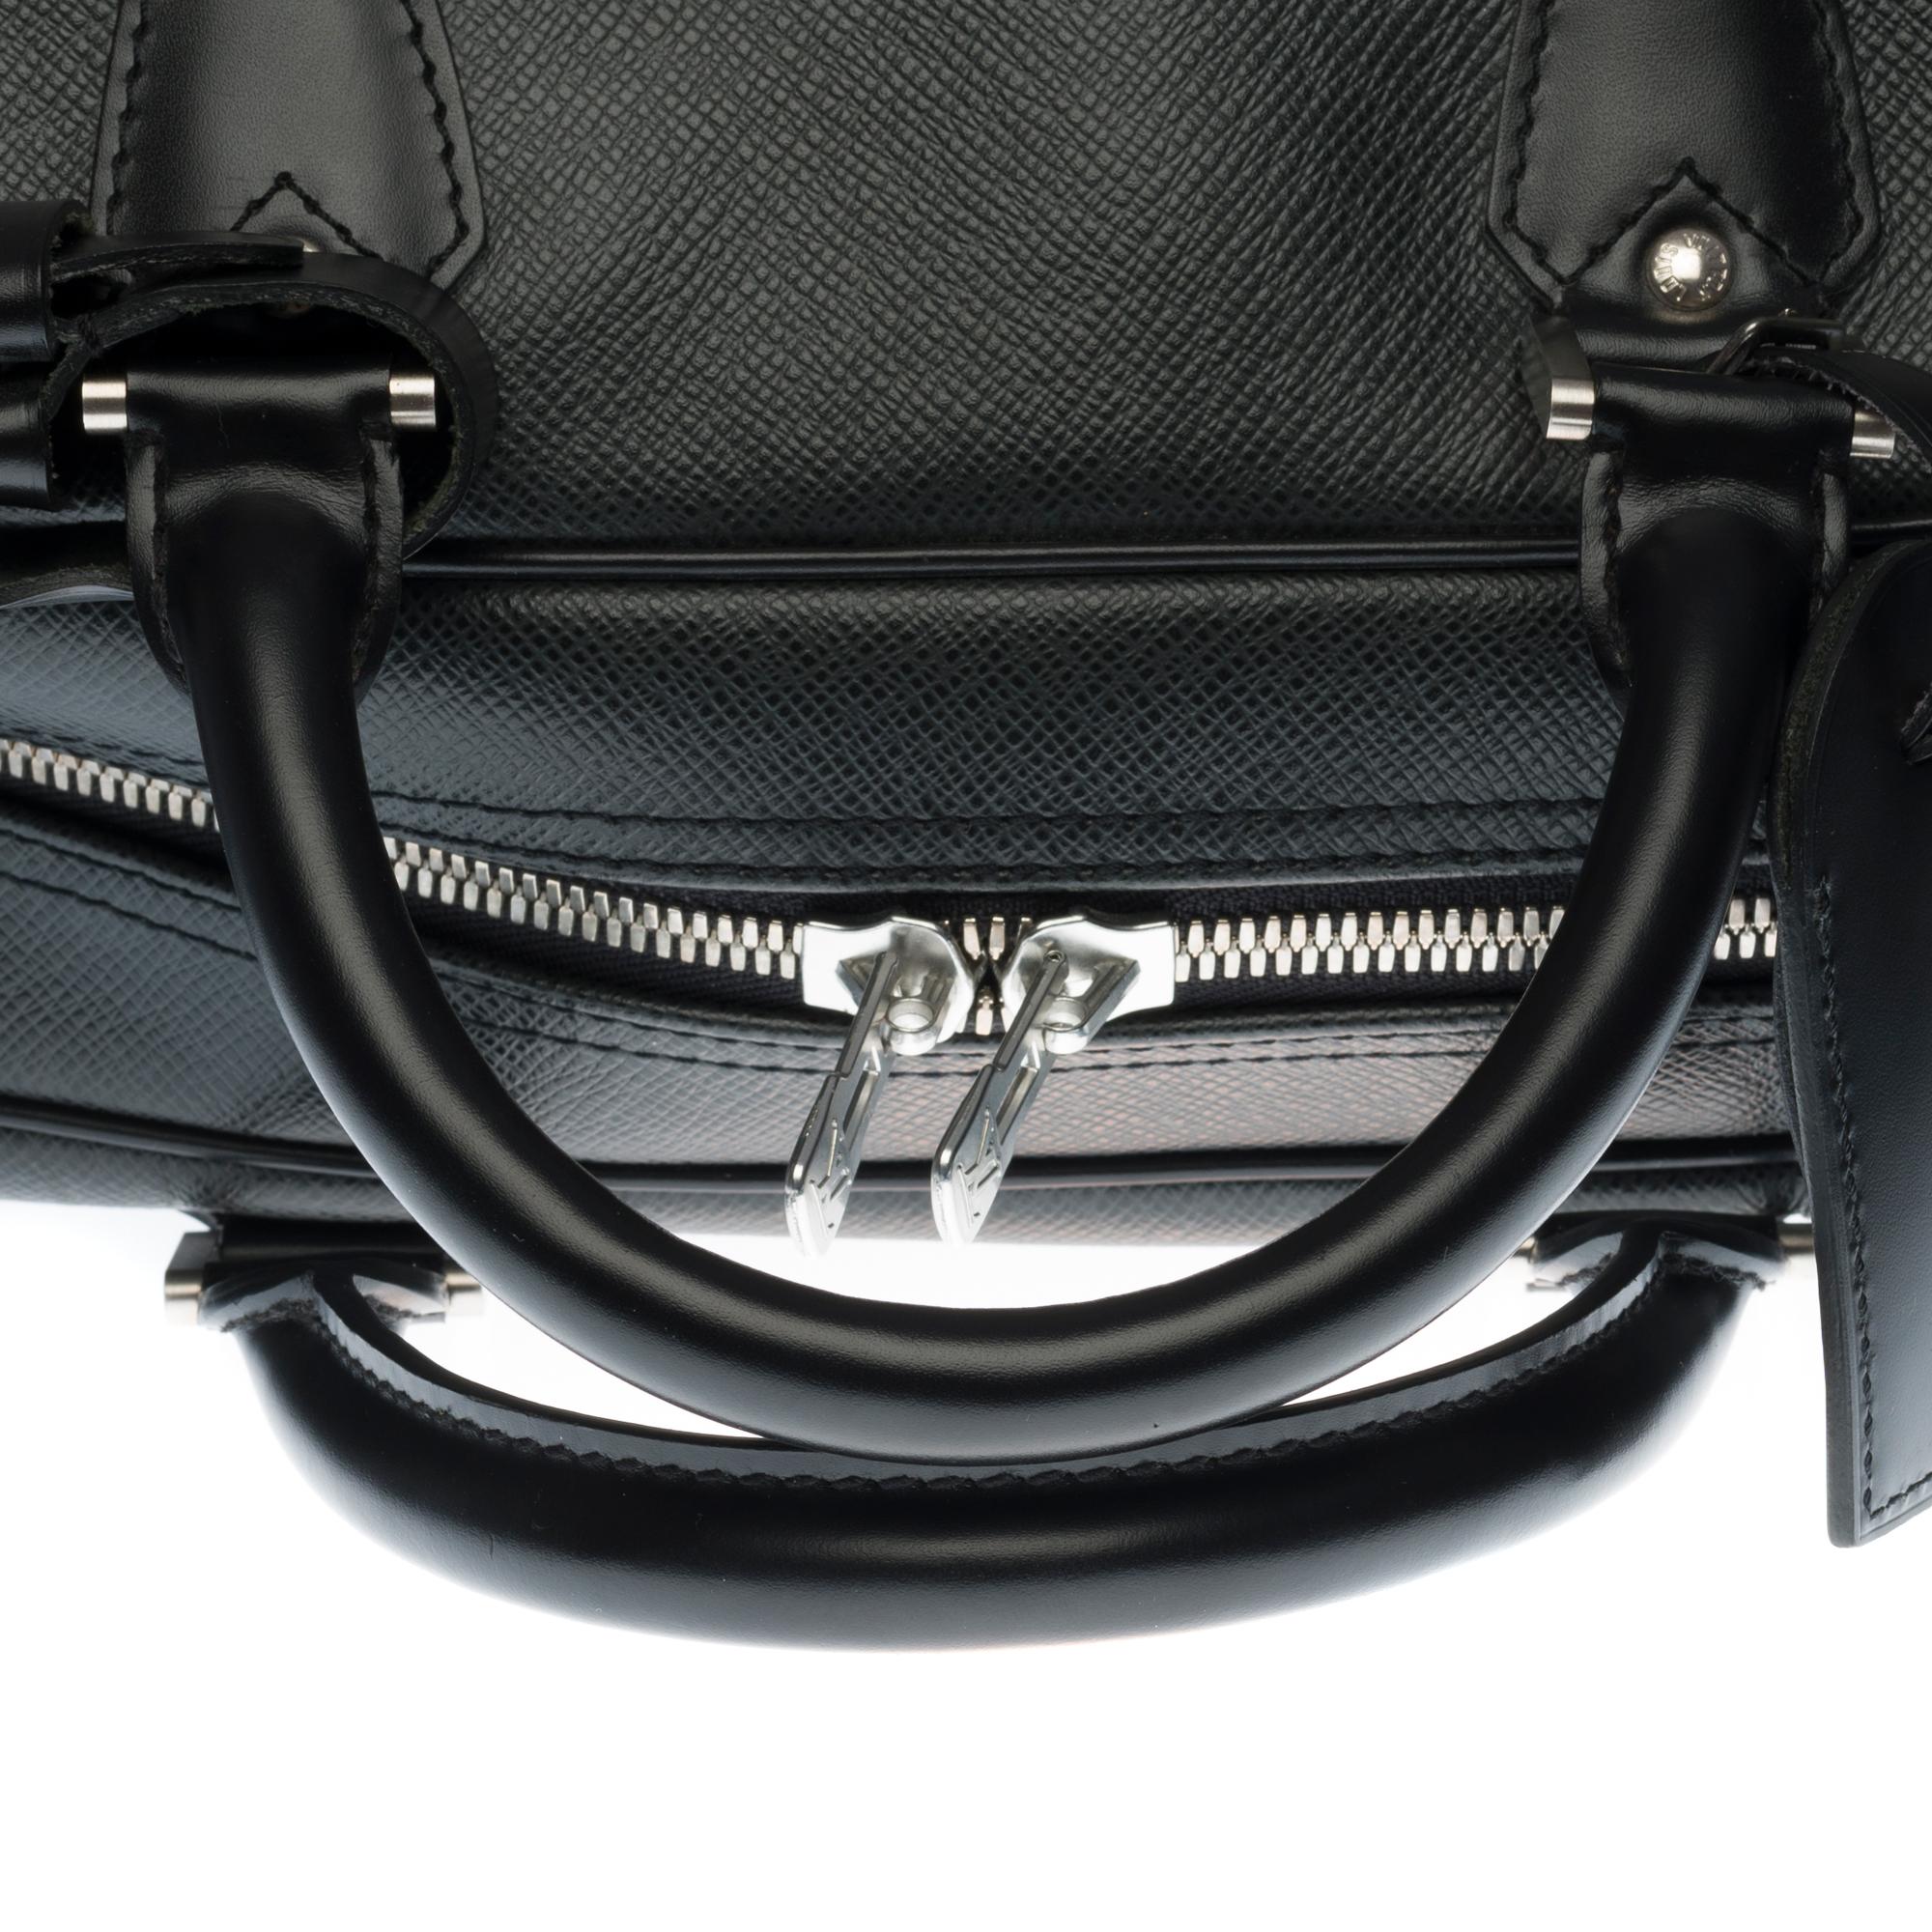 Louis Vuitton Kendall 50 Travel bag in Black Taïga leather and silver hardware 4